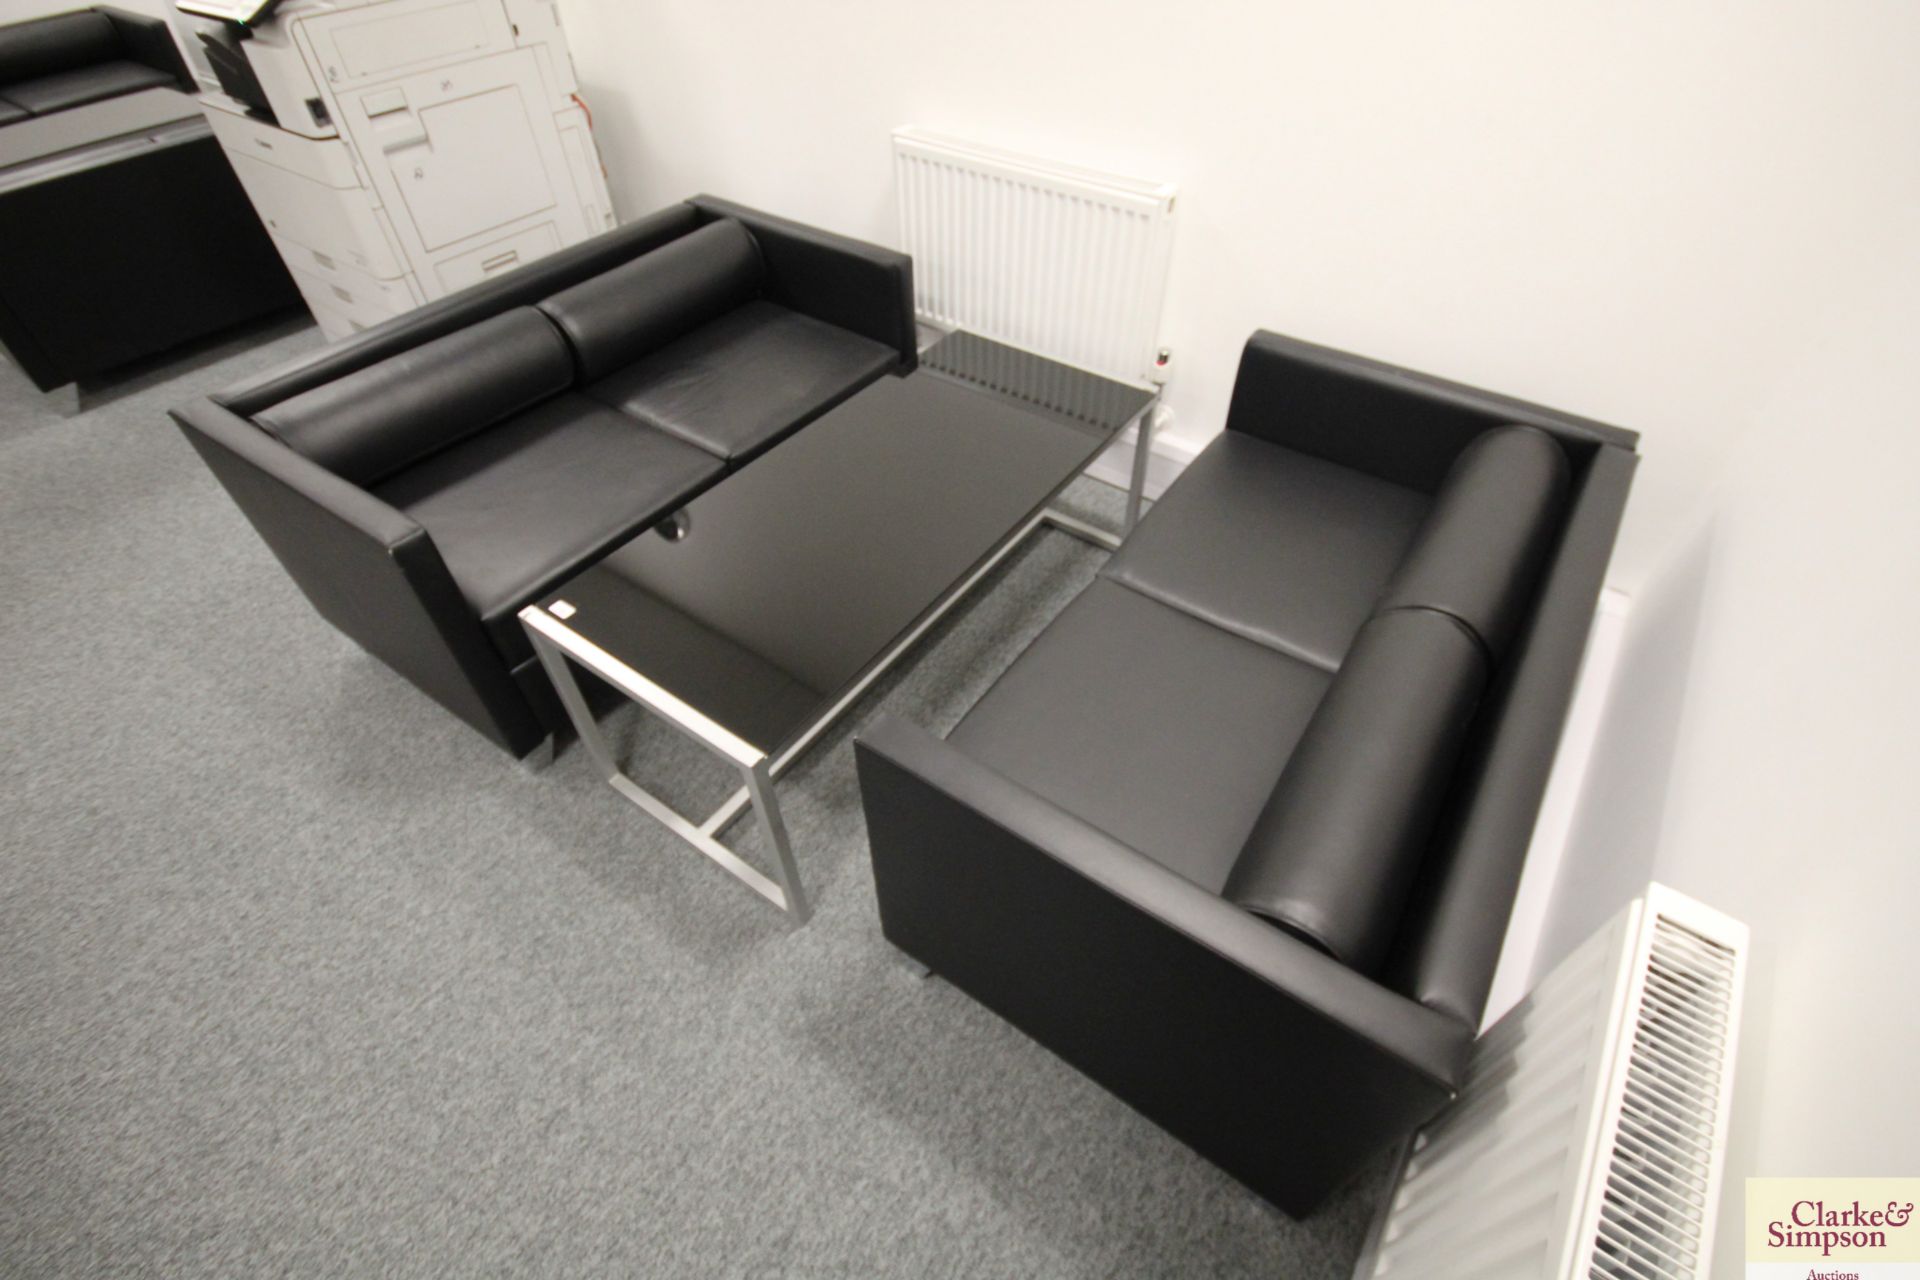 2x two seater leatherette settees with black glass topped coffee table. V - Image 2 of 2